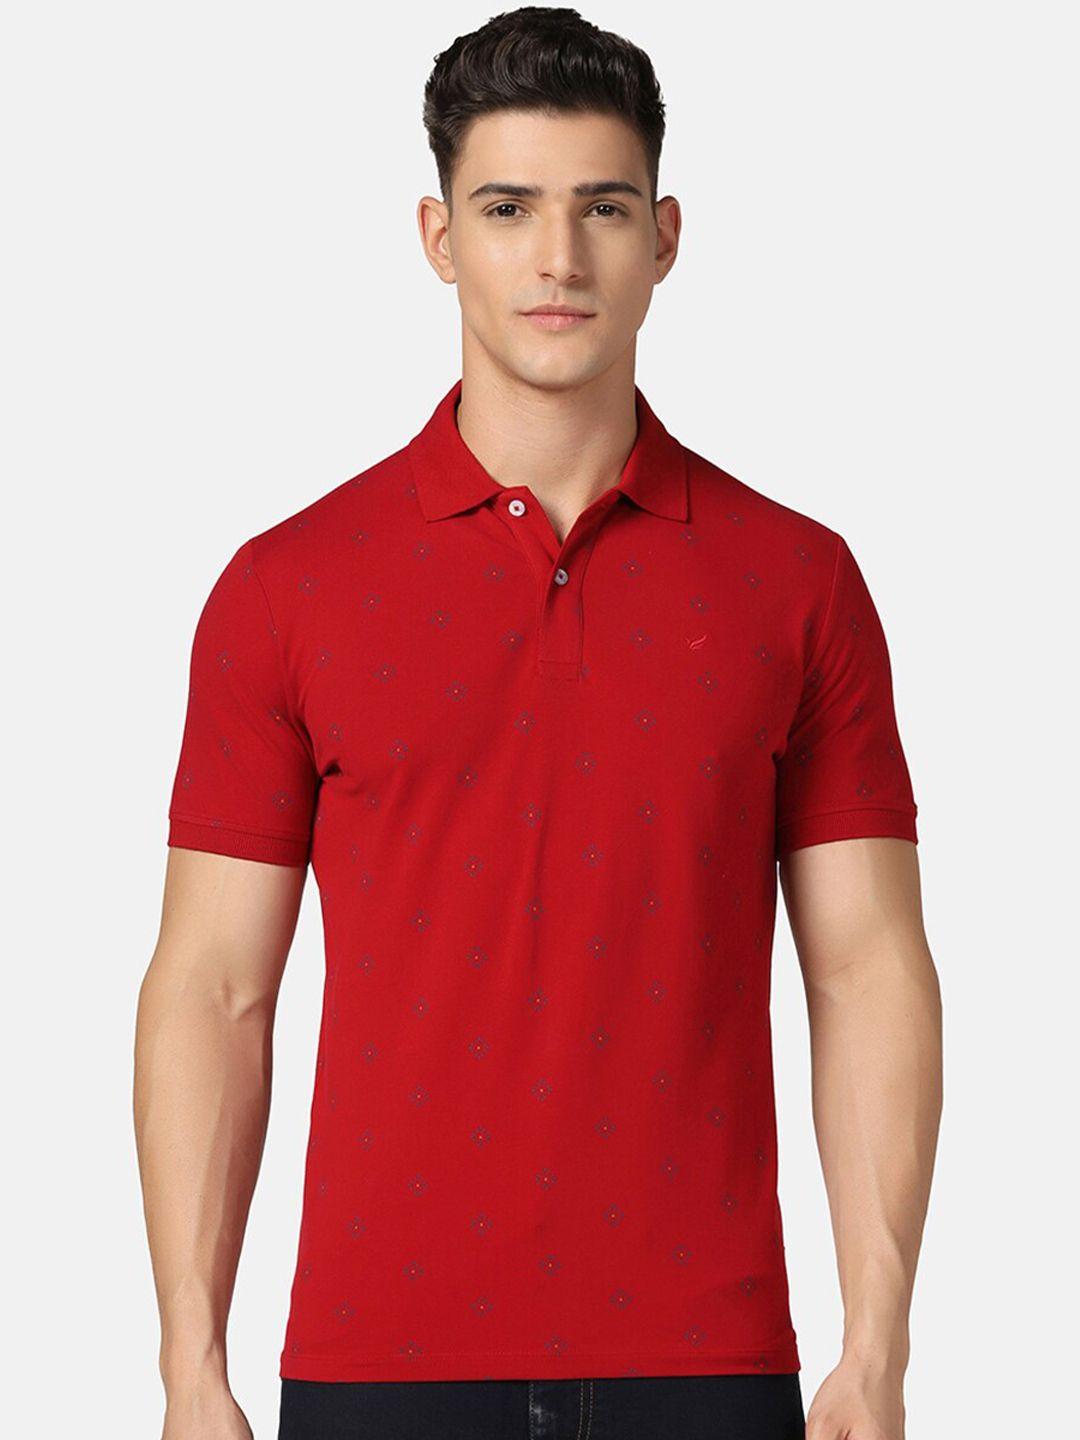 blackberrys-floral-printed-polo-collar-slim-fit-t-shirt